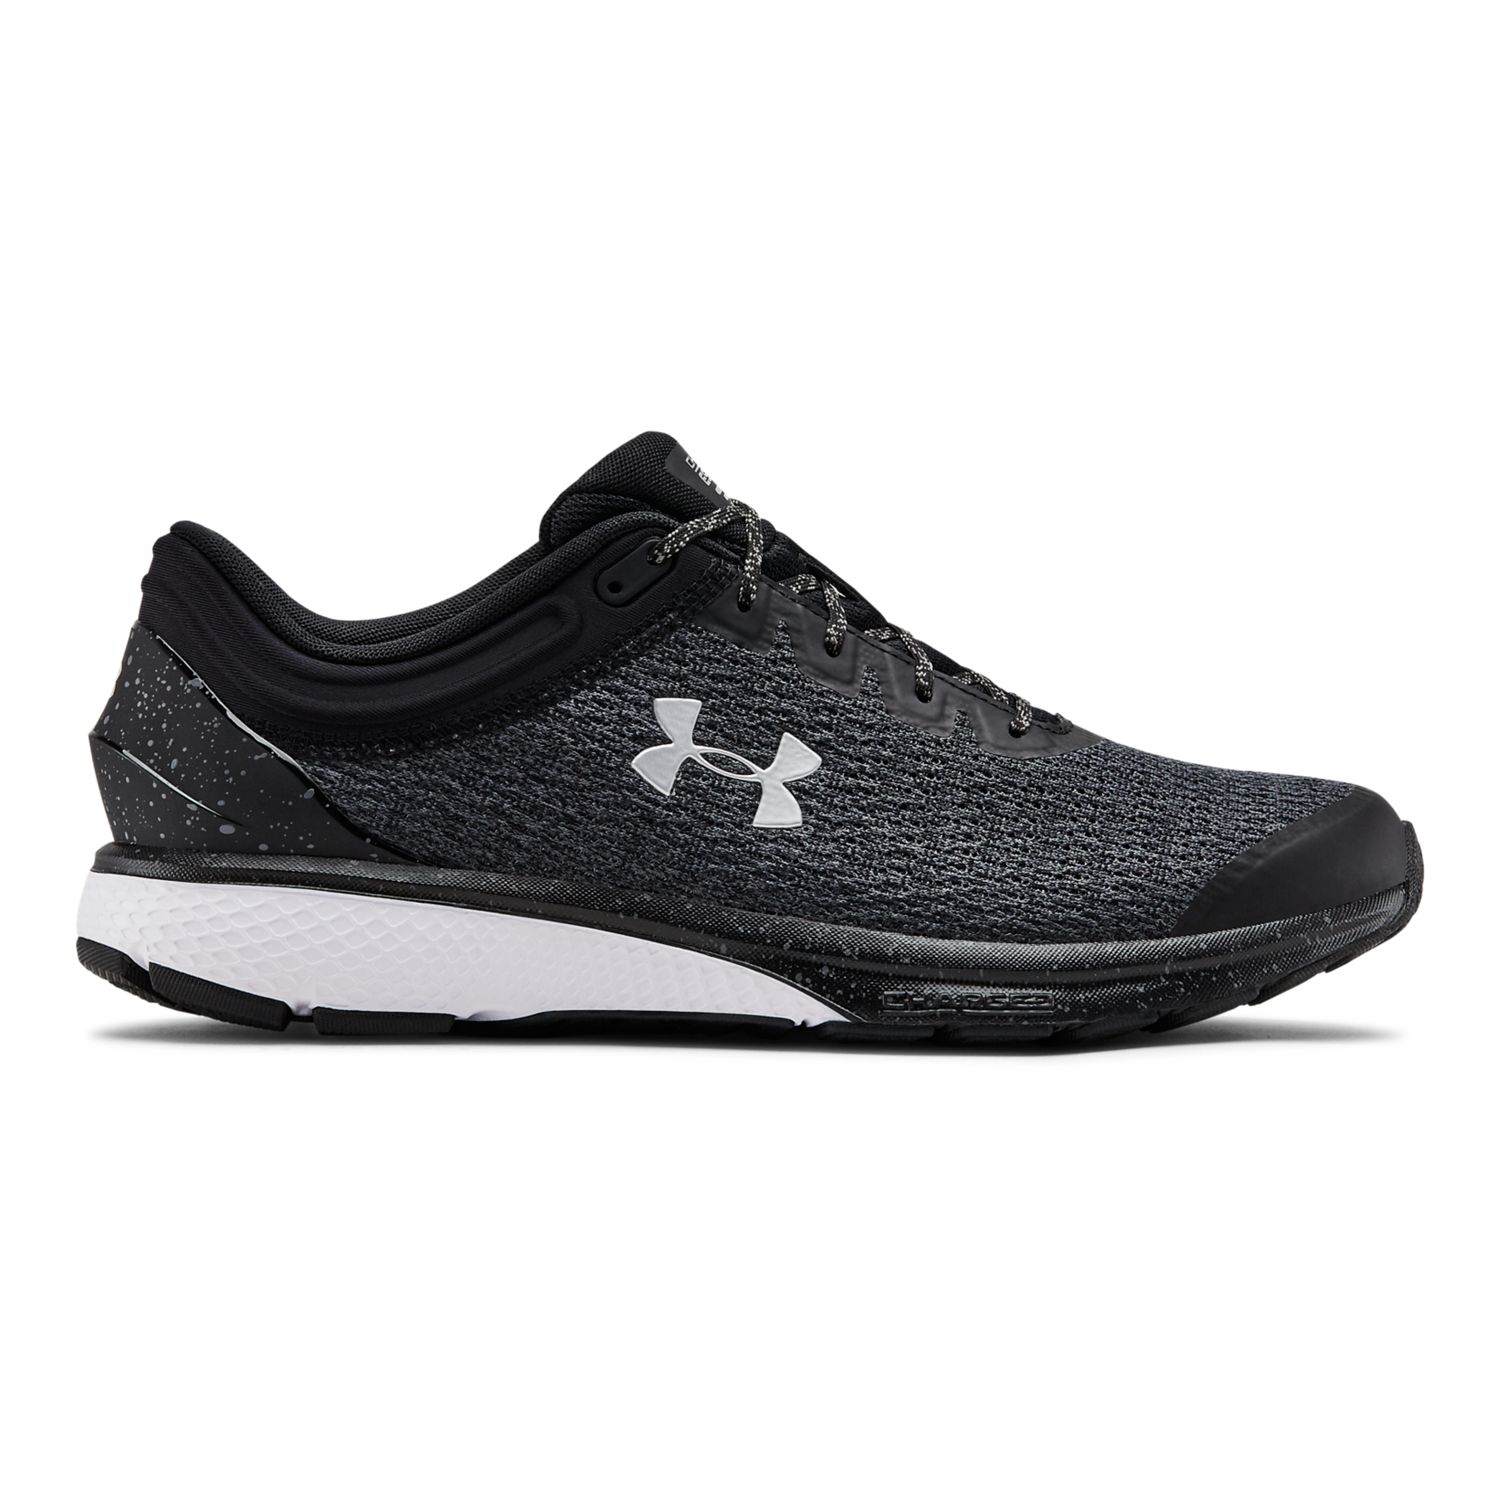 under armour shoes at kohl's